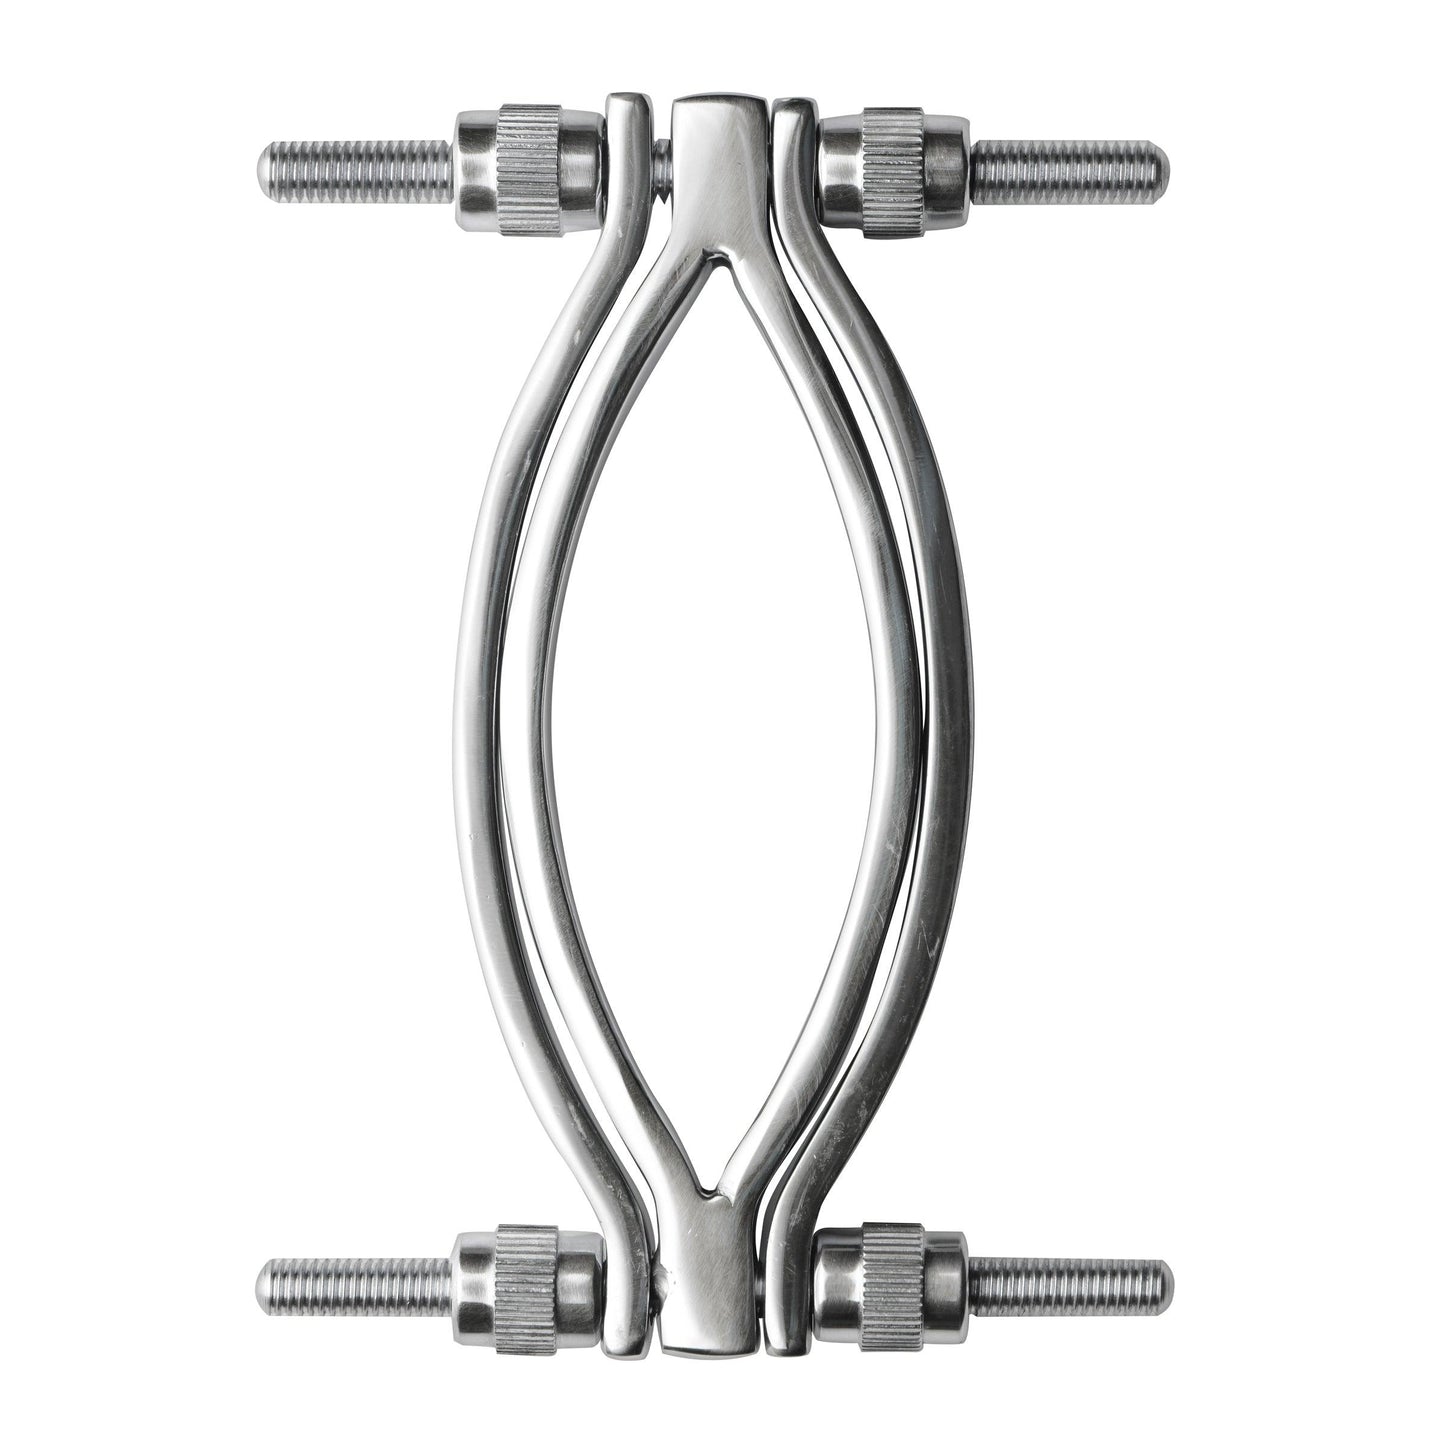 Stainless Steel Adjustable Pussy Clamp - Take A Peek